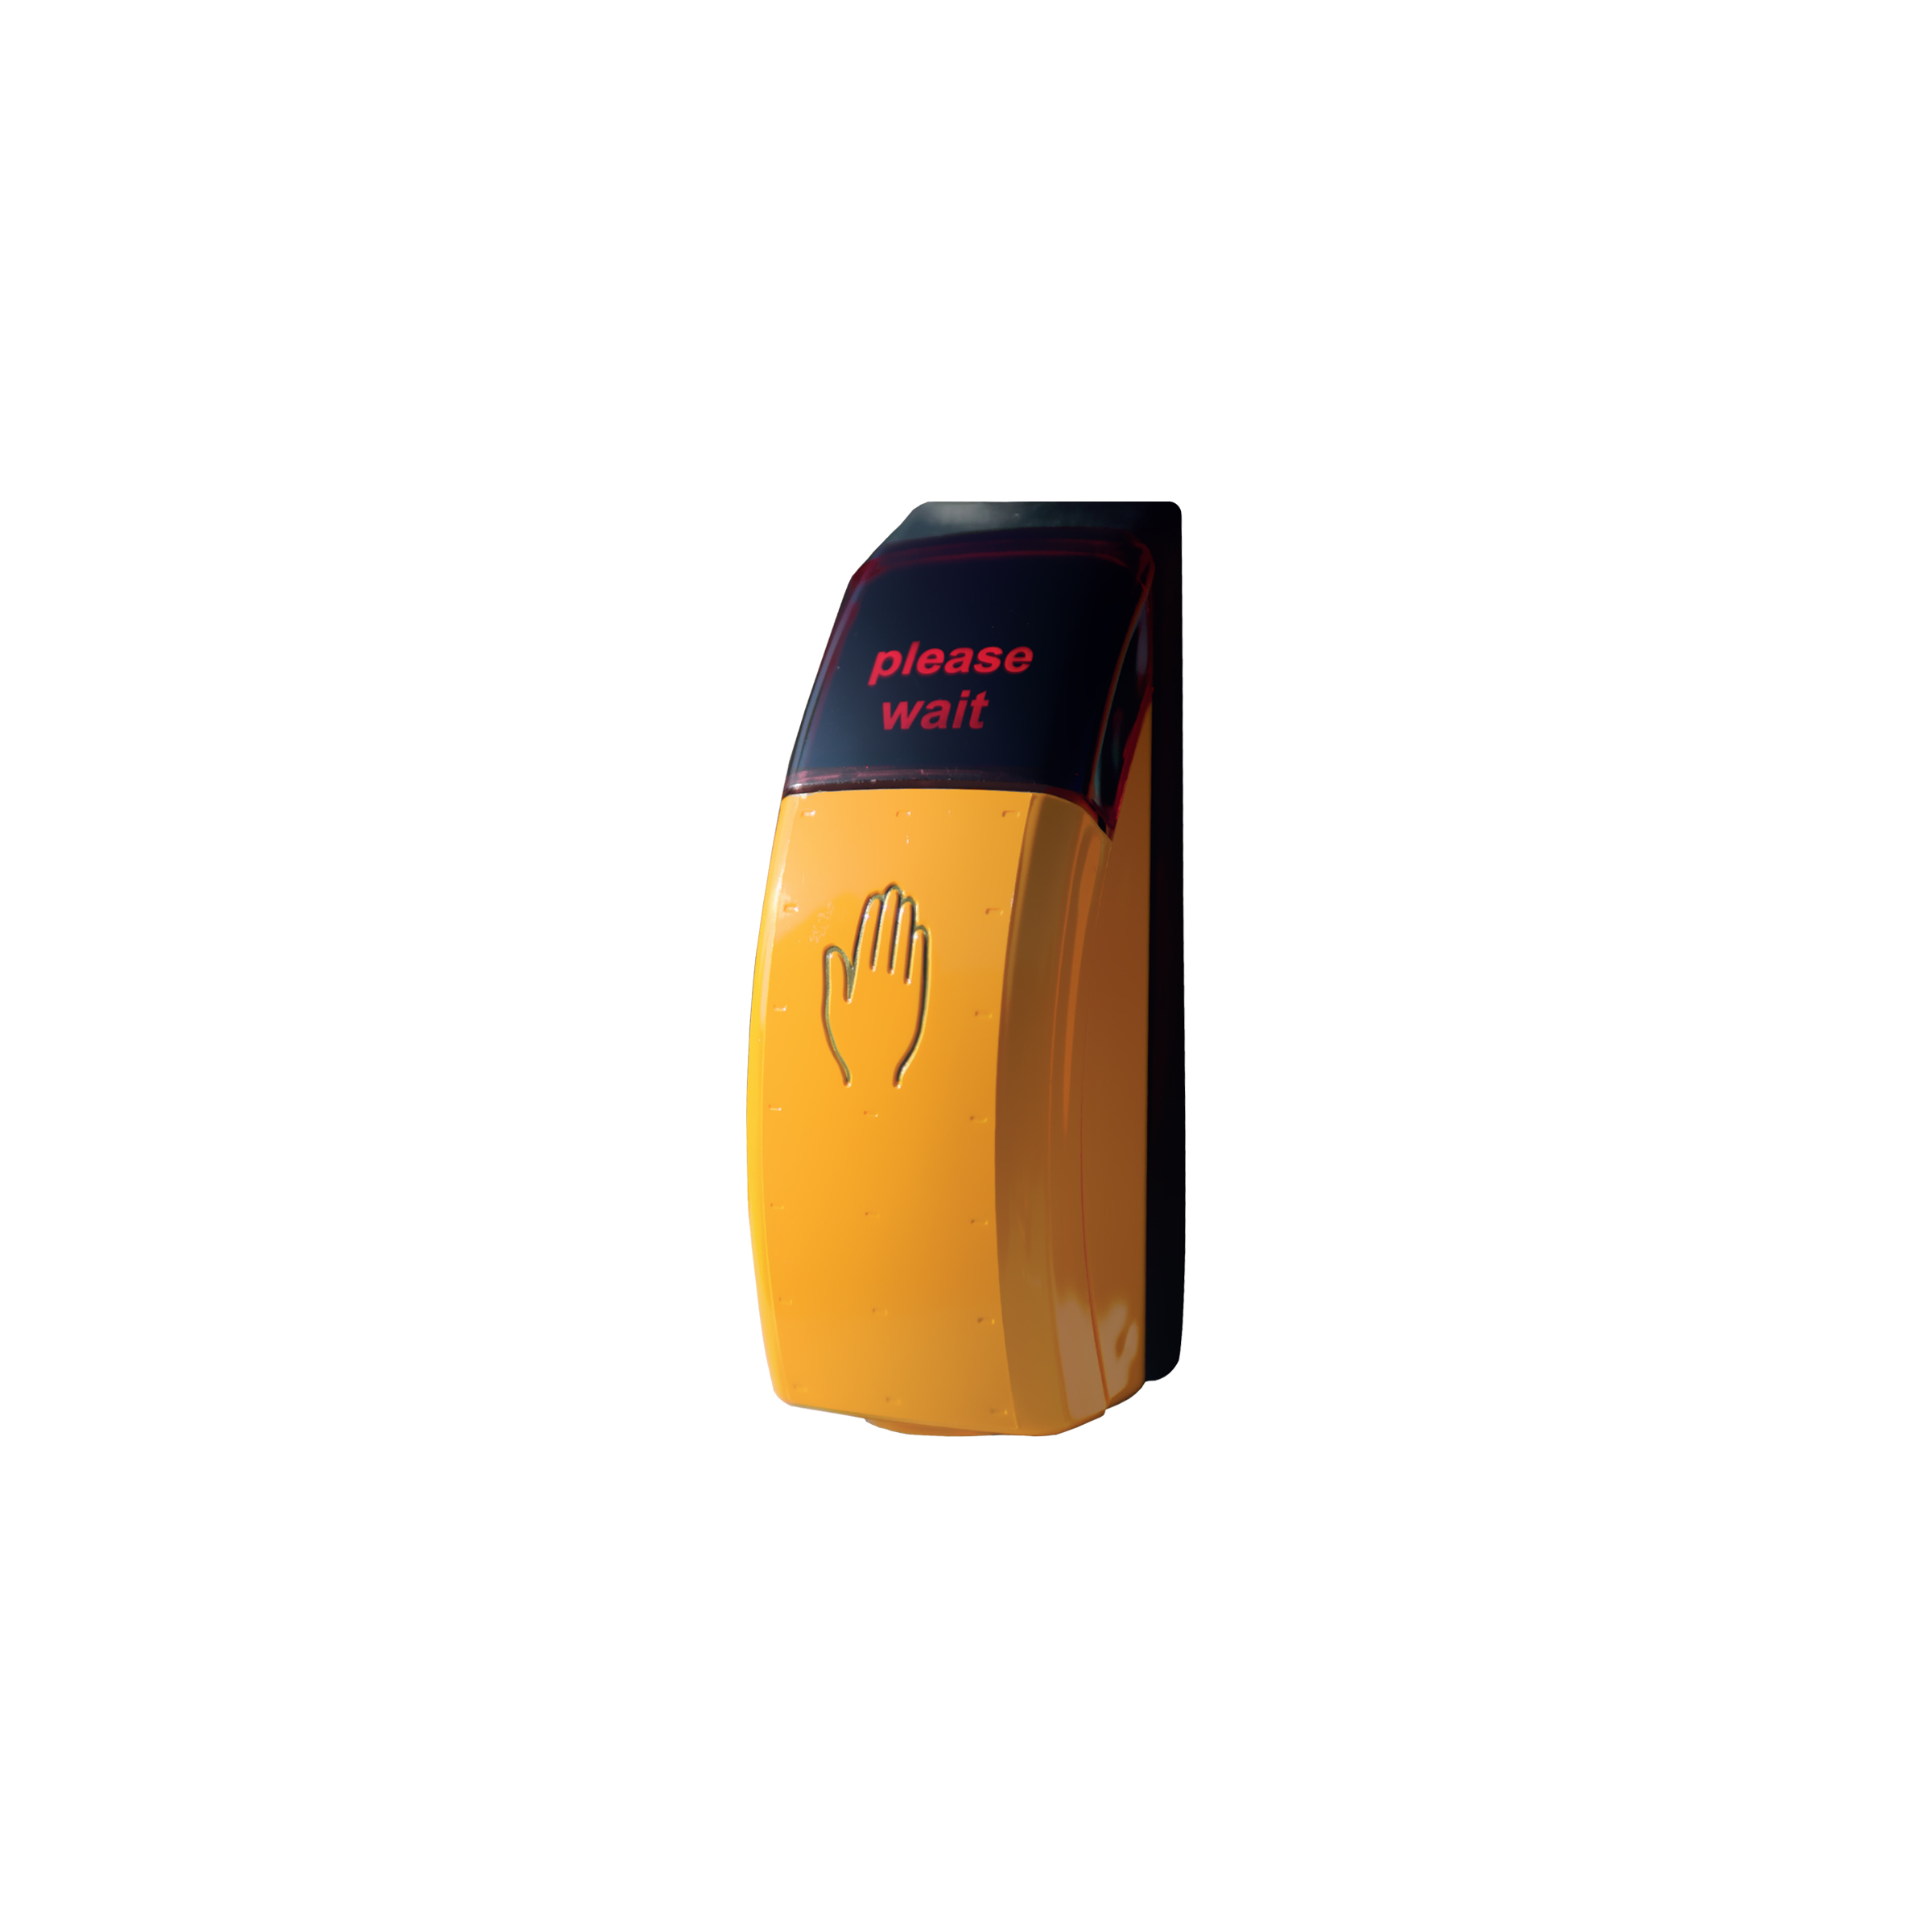 Touch Sensor Push Button - Pascal - Traffic Control Systems